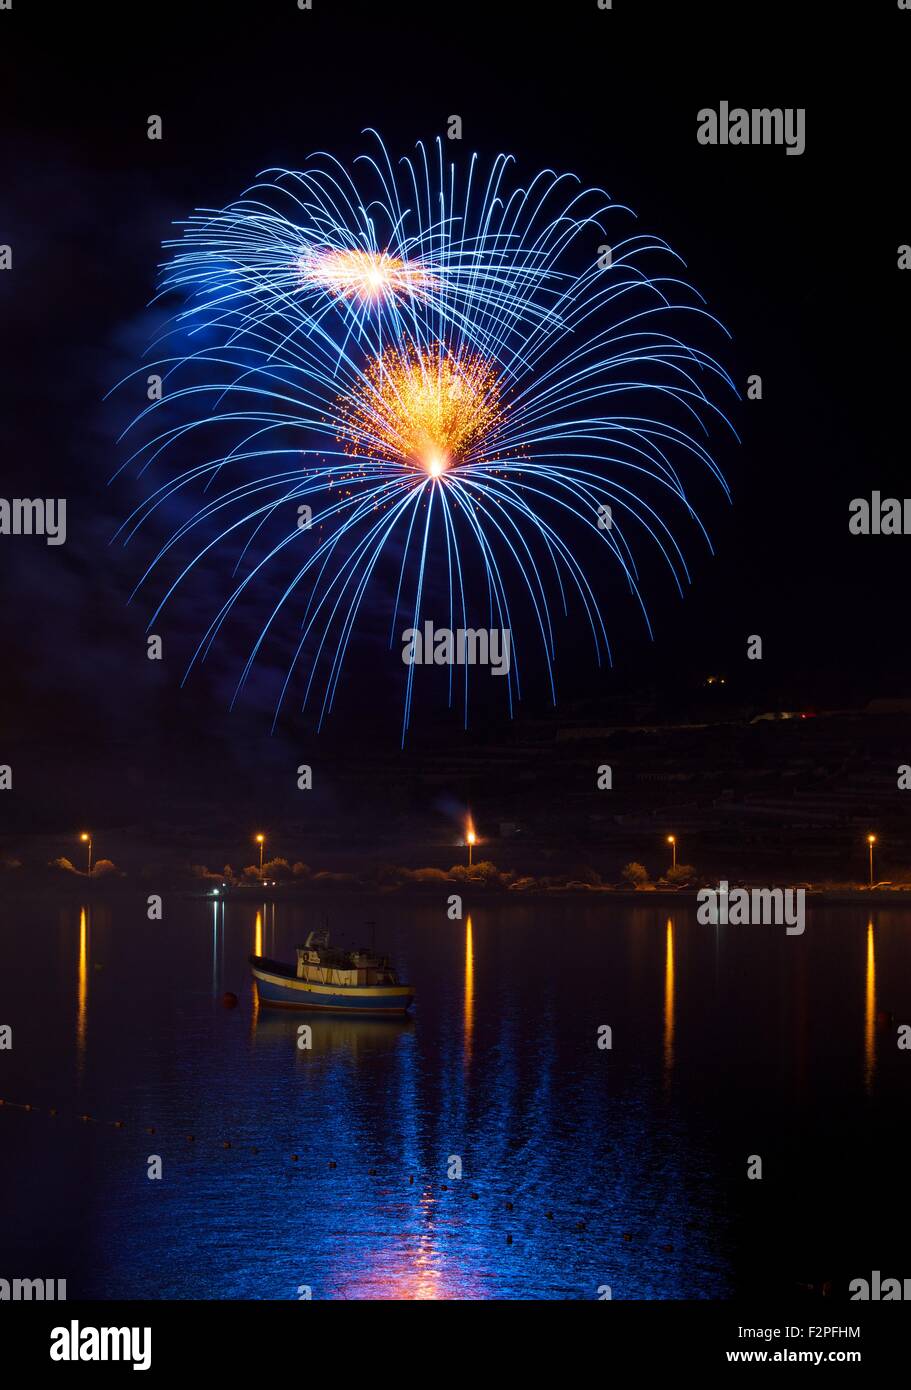 Blue colors amazing fireworks in Malta with the dark sky background Stock Photo